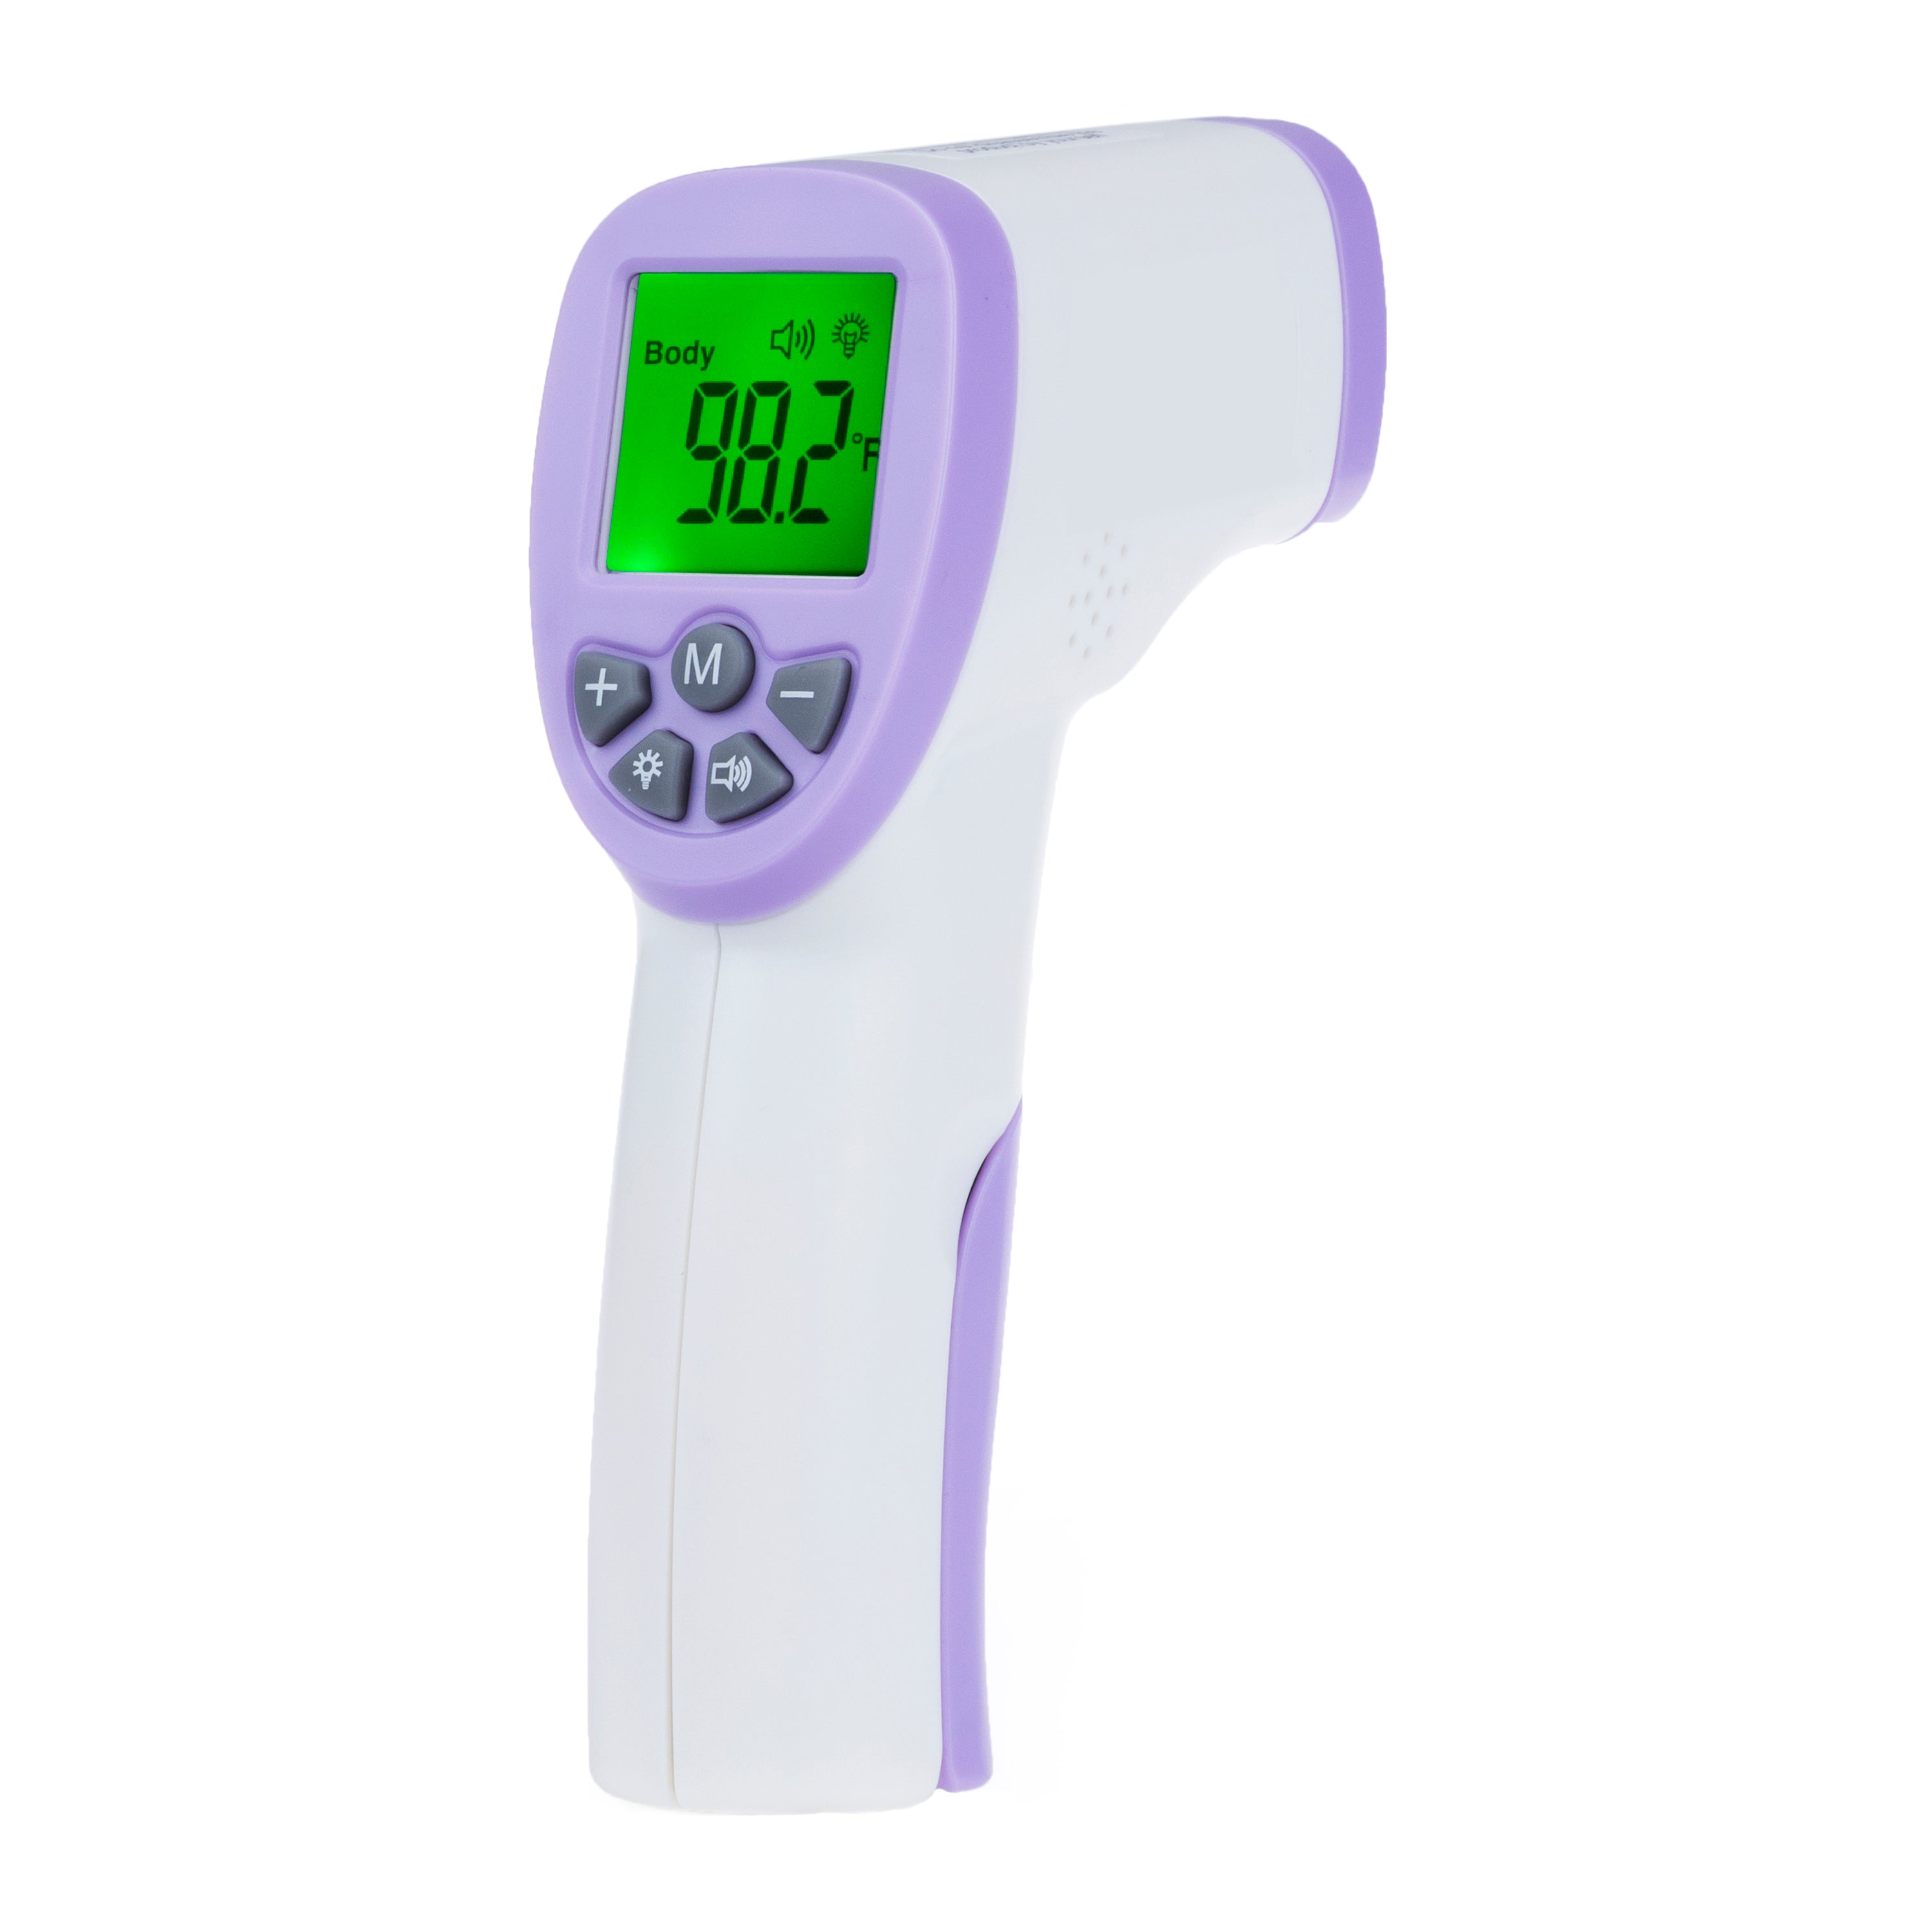 Garrett IR Digital Thermometer Non-Contact Infrared Forehead Thermometer, Shop, Features